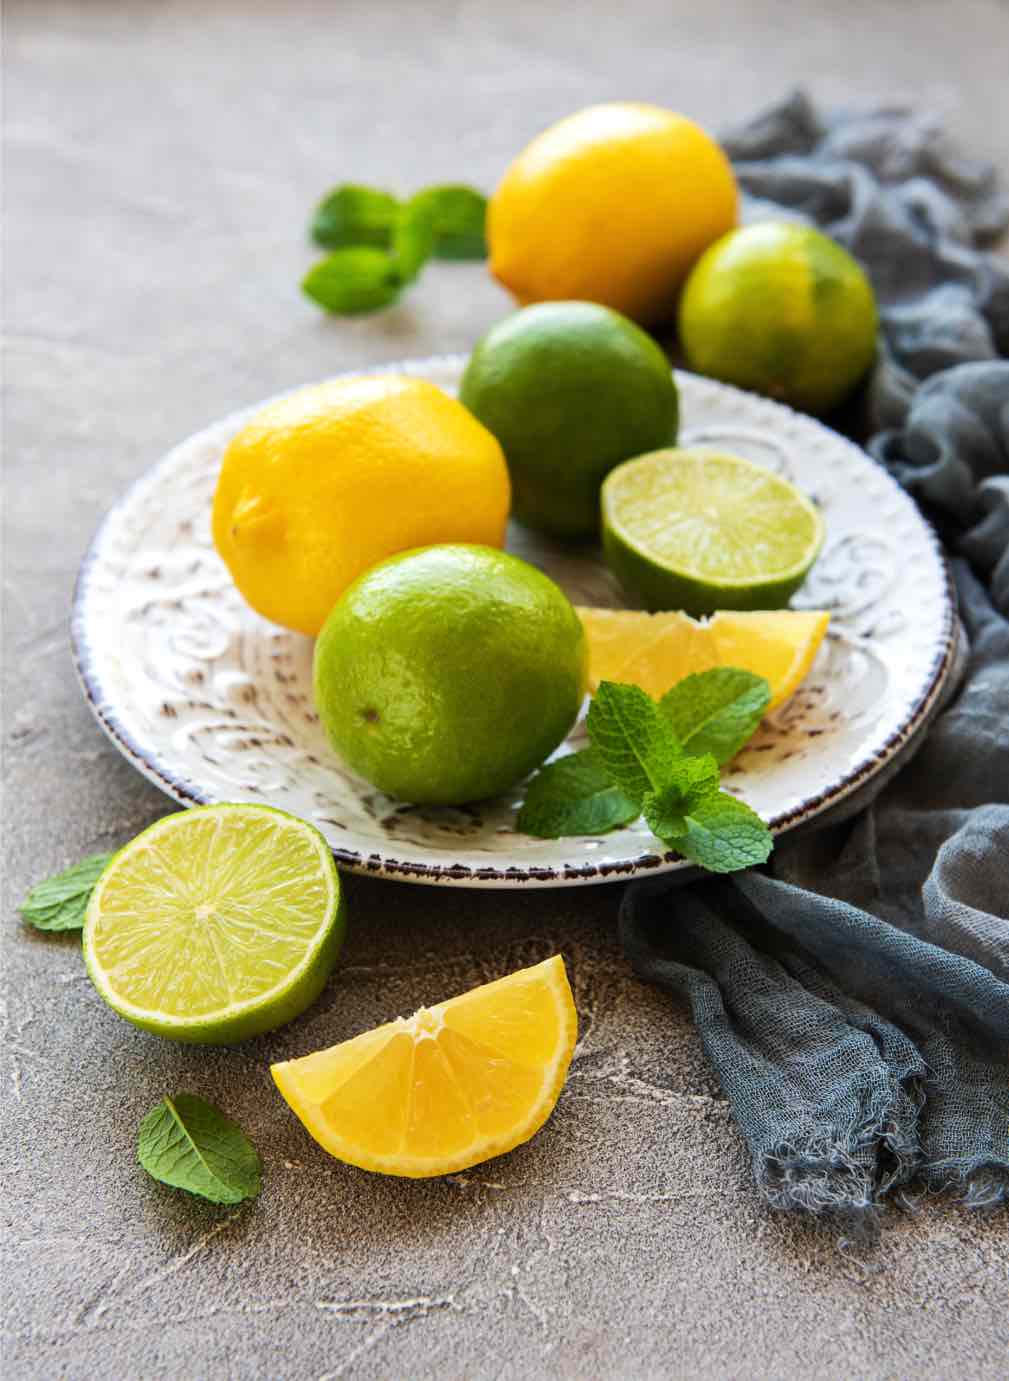 Lemons and limes are great for humans, but not for dogs - learn more with Dog Training Elite Michiana in South Bend / Elkhart!